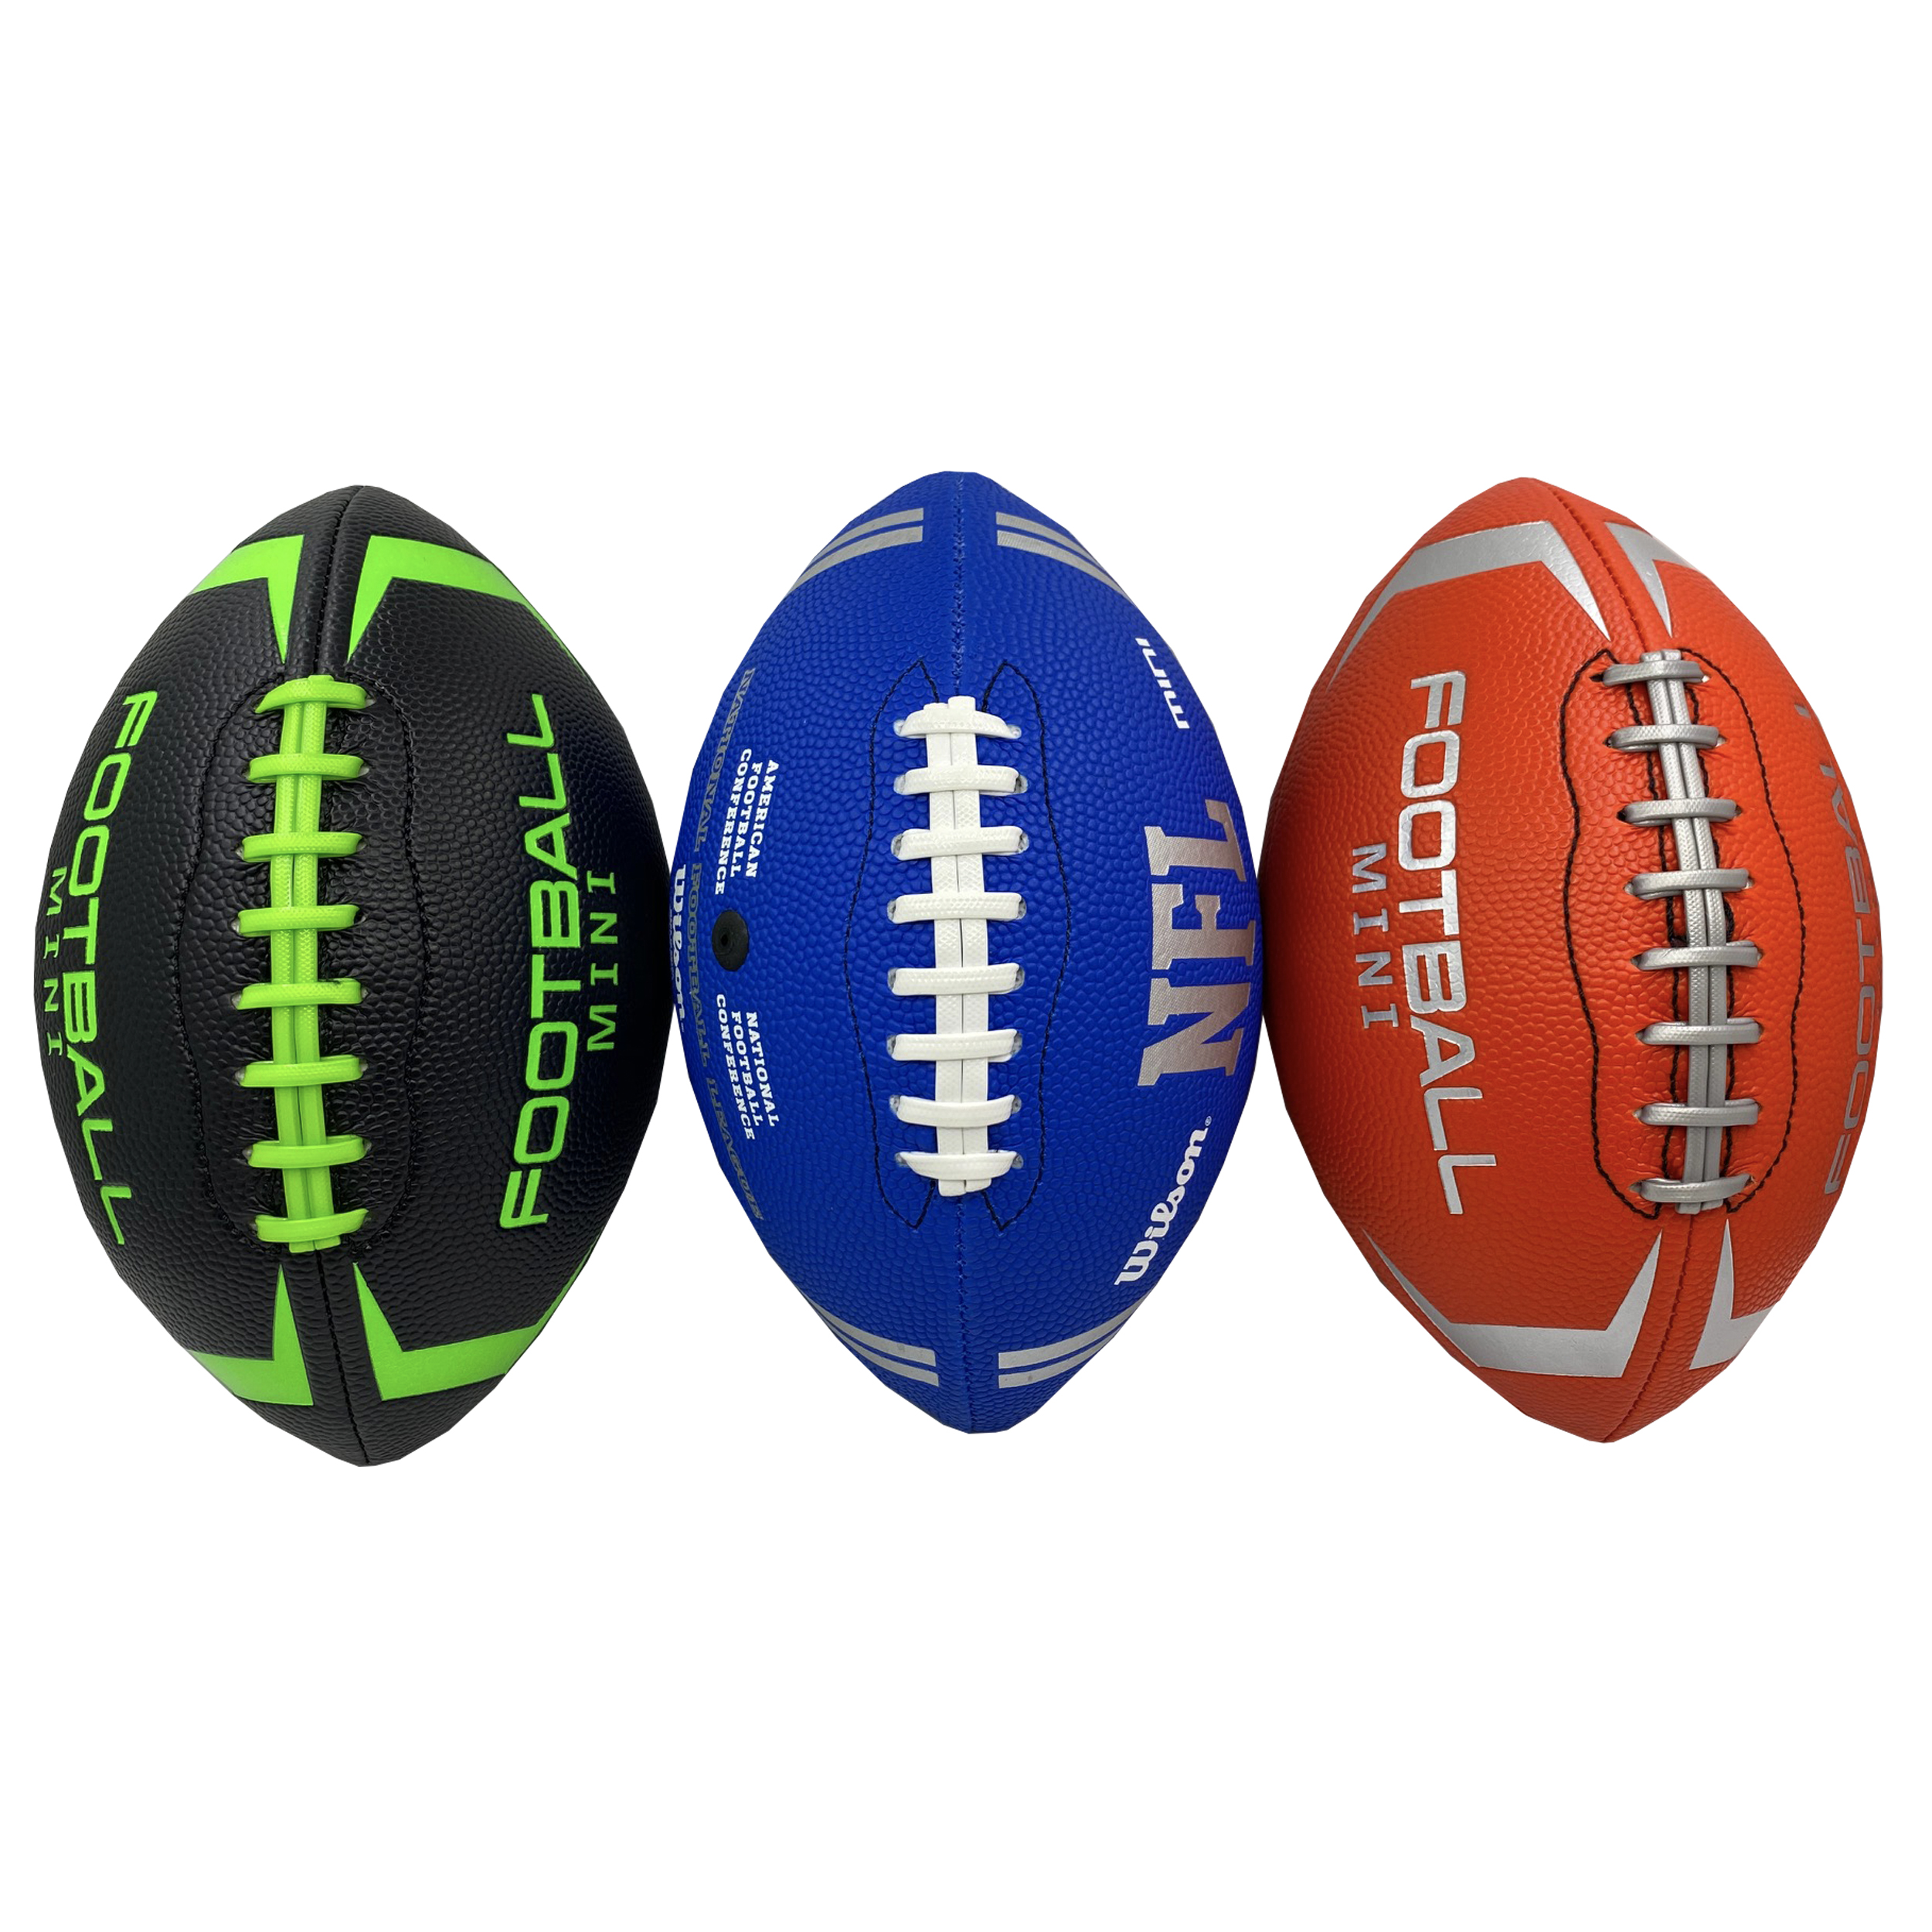 Magic Time Mini 6” Rubber Football Toy Ball, Kids Teen, Unisex, Assorted Colors Black, Red, Blue - image 1 of 7